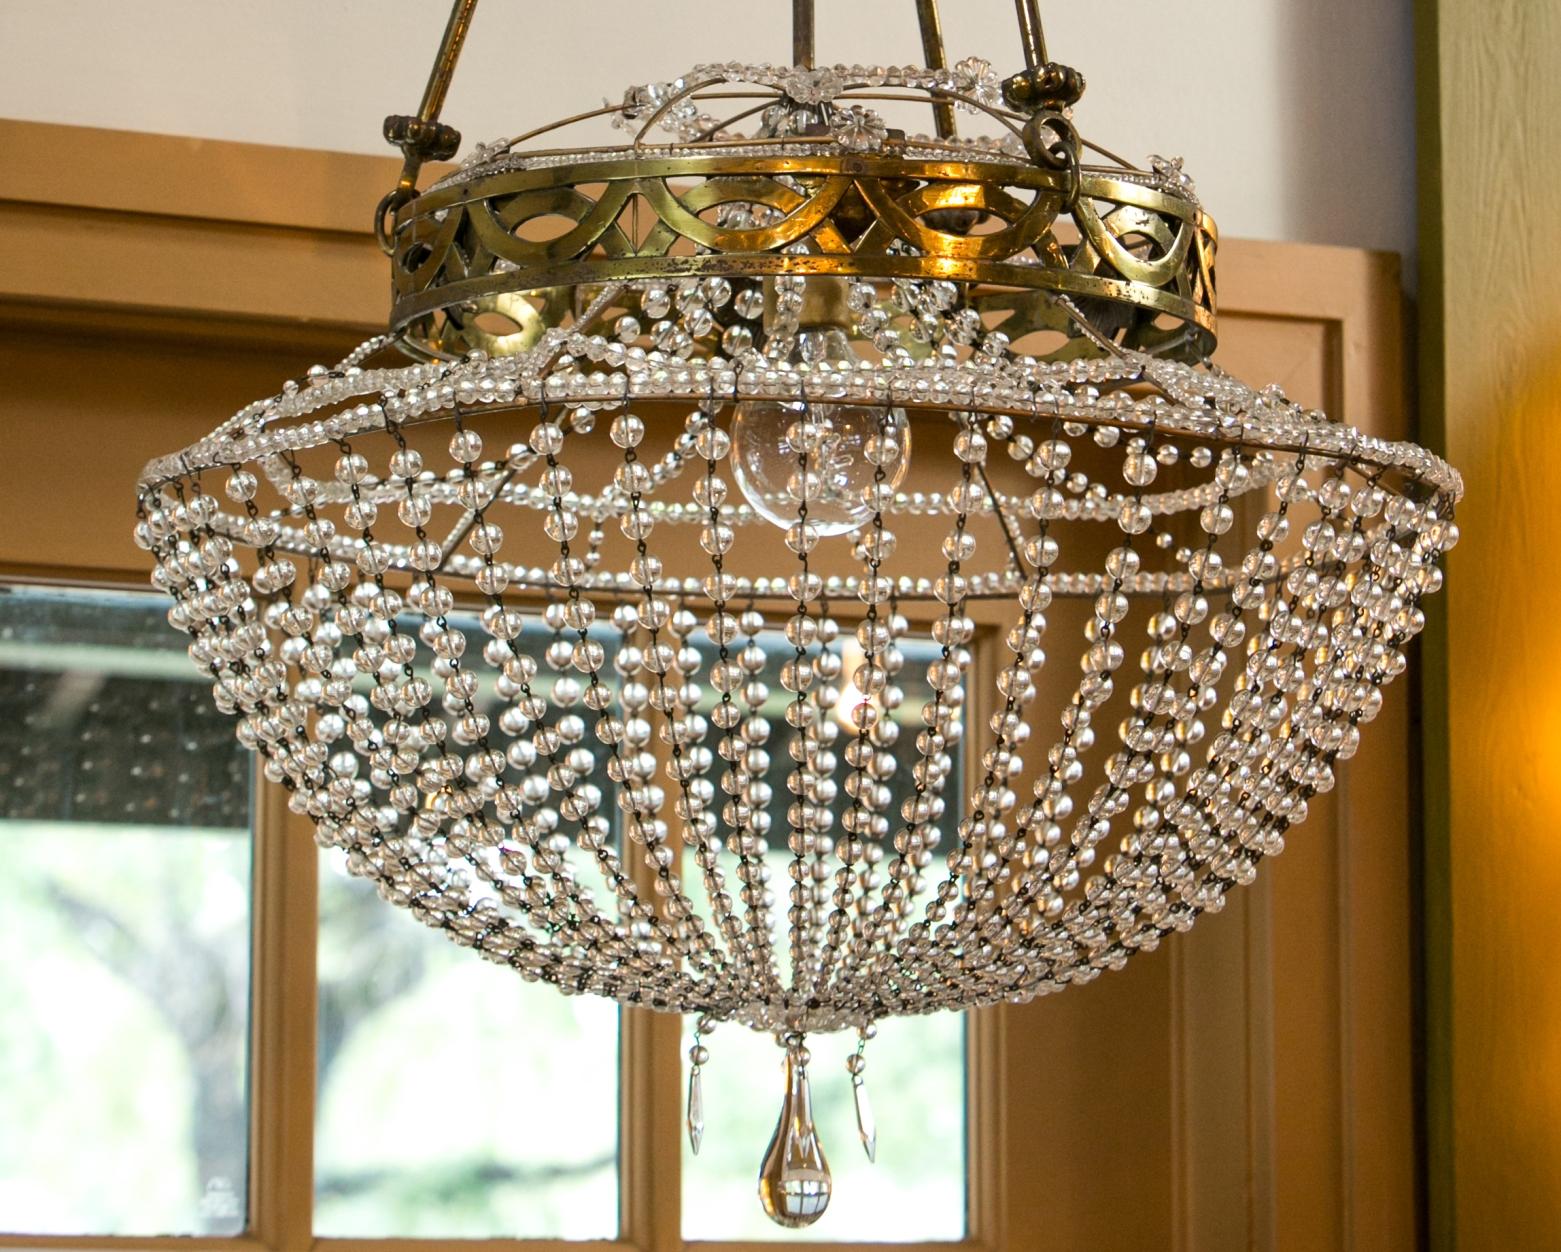 Vintage glass beaded basket chandelier from Austria. Glass beaded basket-form chandelier, with a gilt-brass frame, suspended by four decorative rods that meet above at a central gatherer. Newly wired for use within the USA. Includes extra chain and